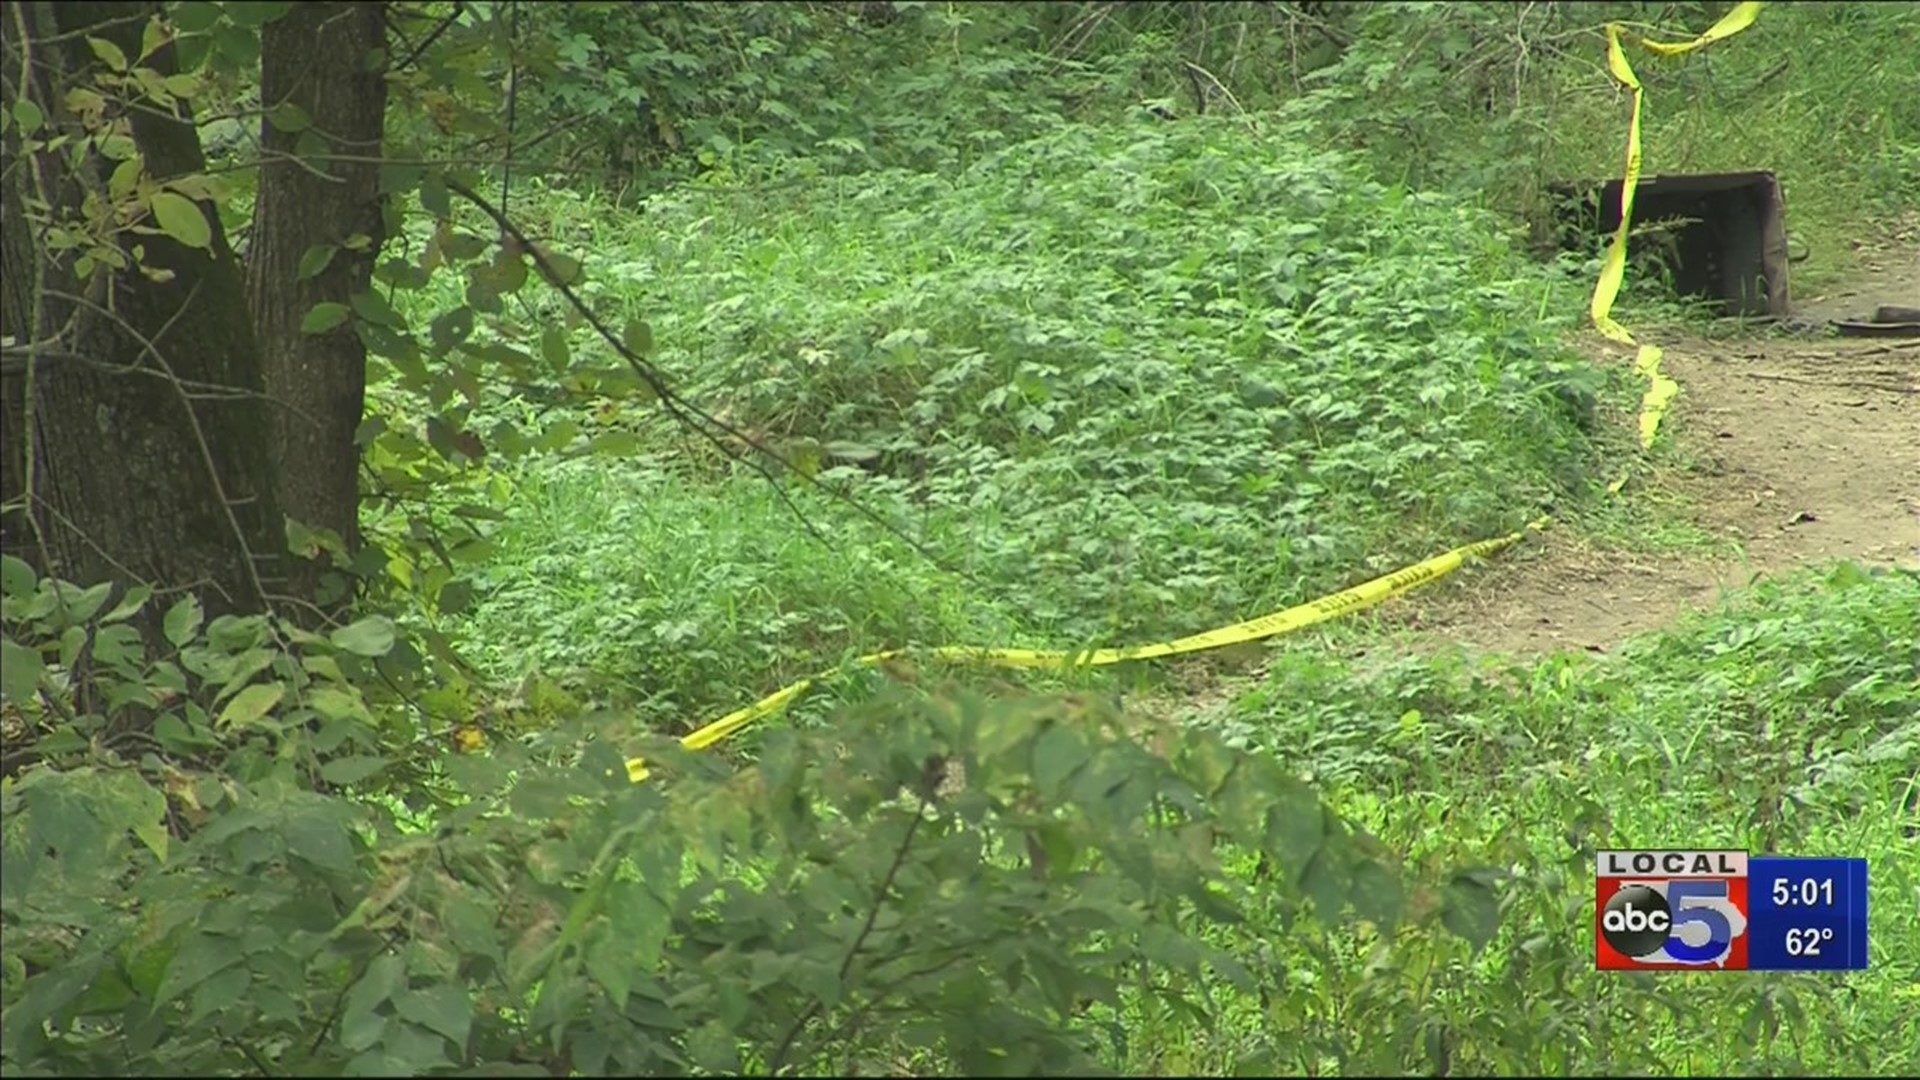 Des Moines police investigating suspicious death after finding human remains